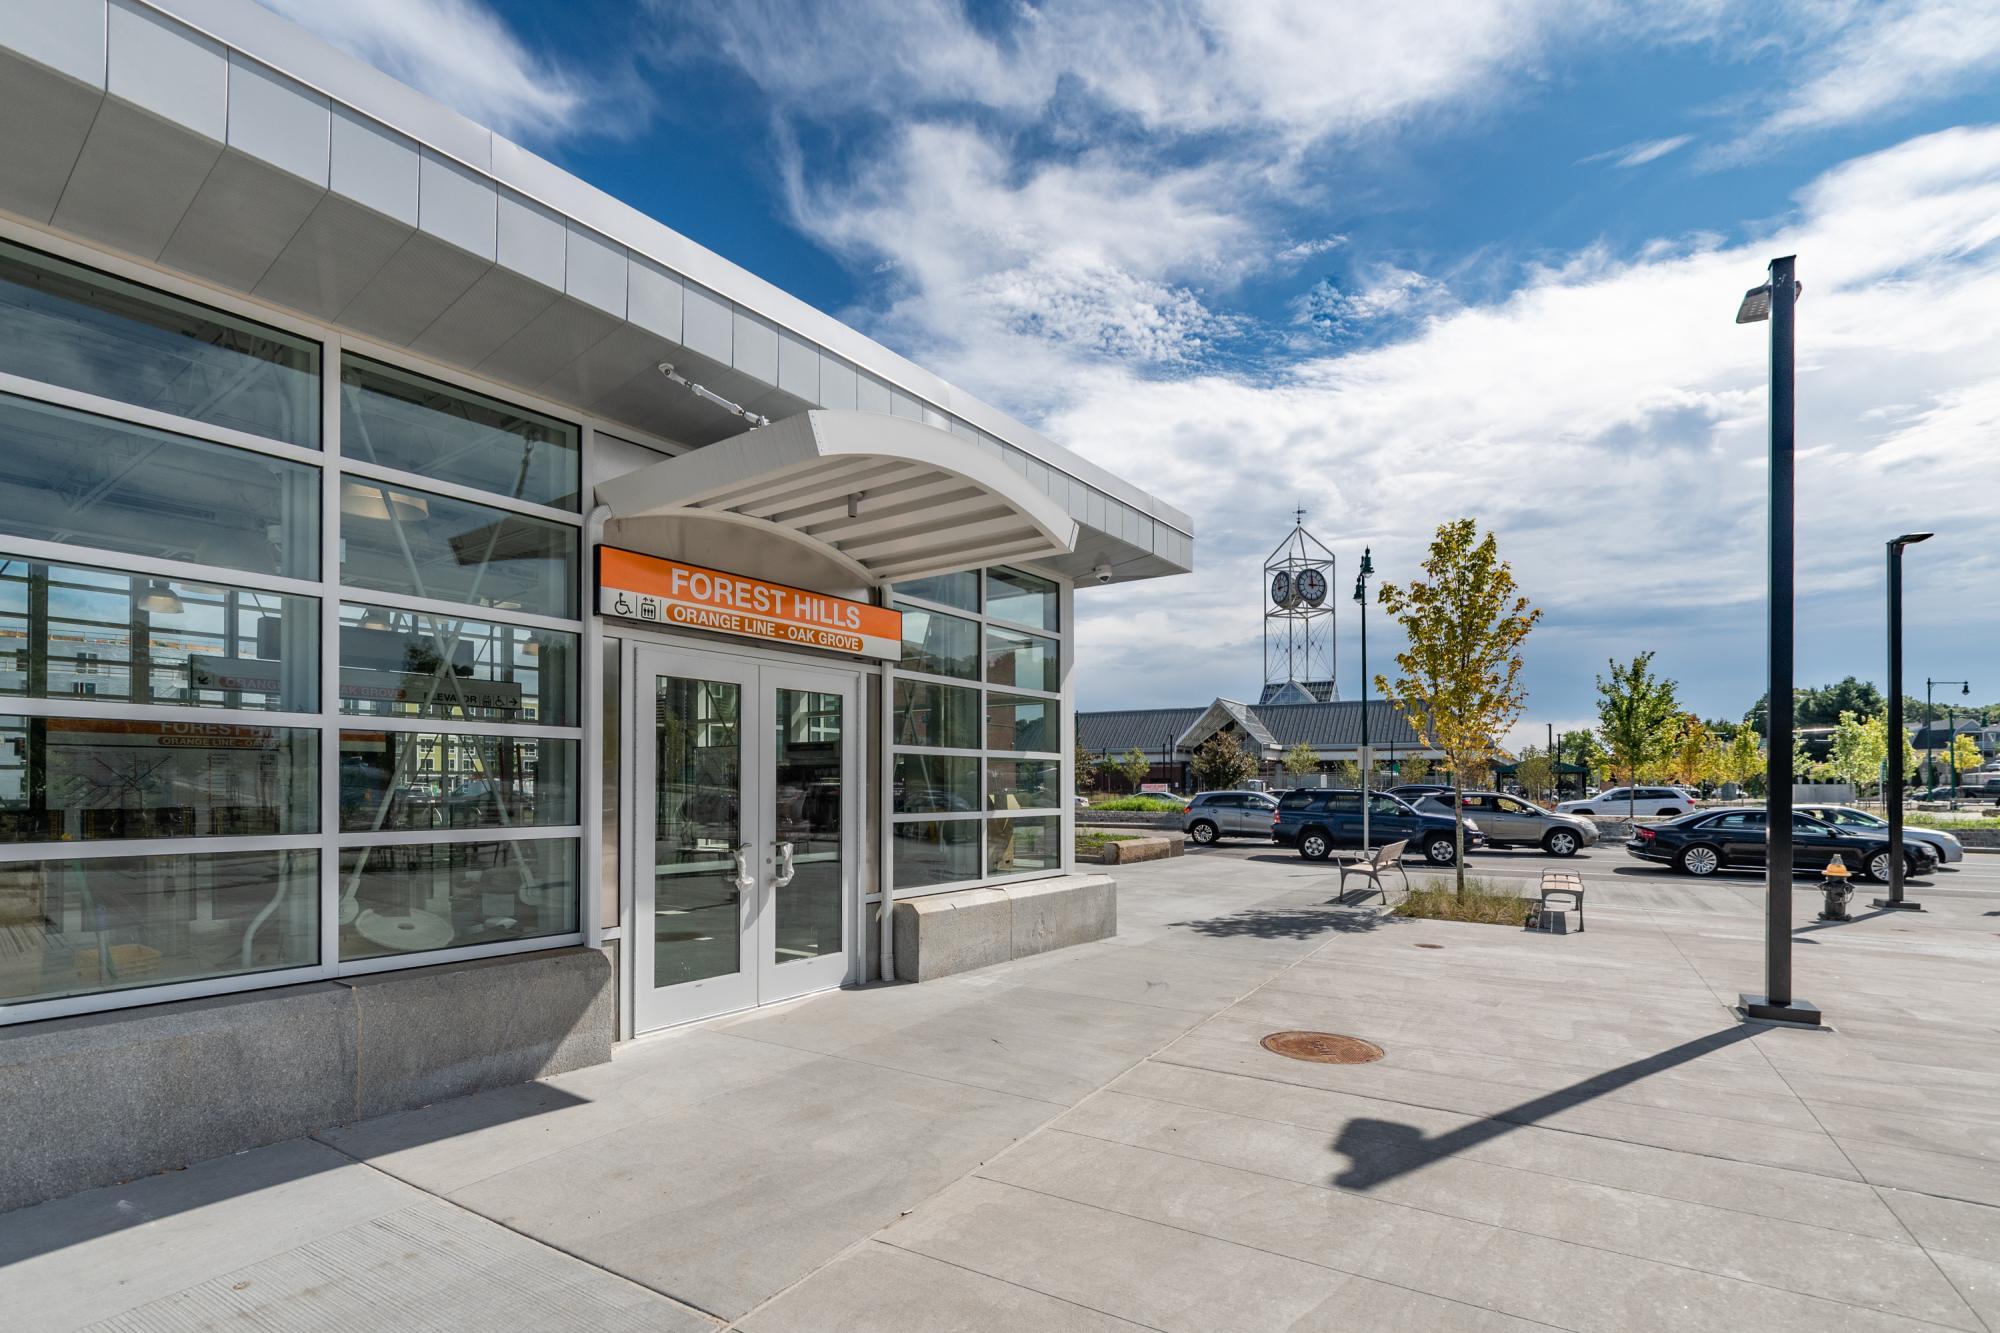 A new, fully accessible entrance to the Orange Line platform at Forest Hills opened in October 2019.